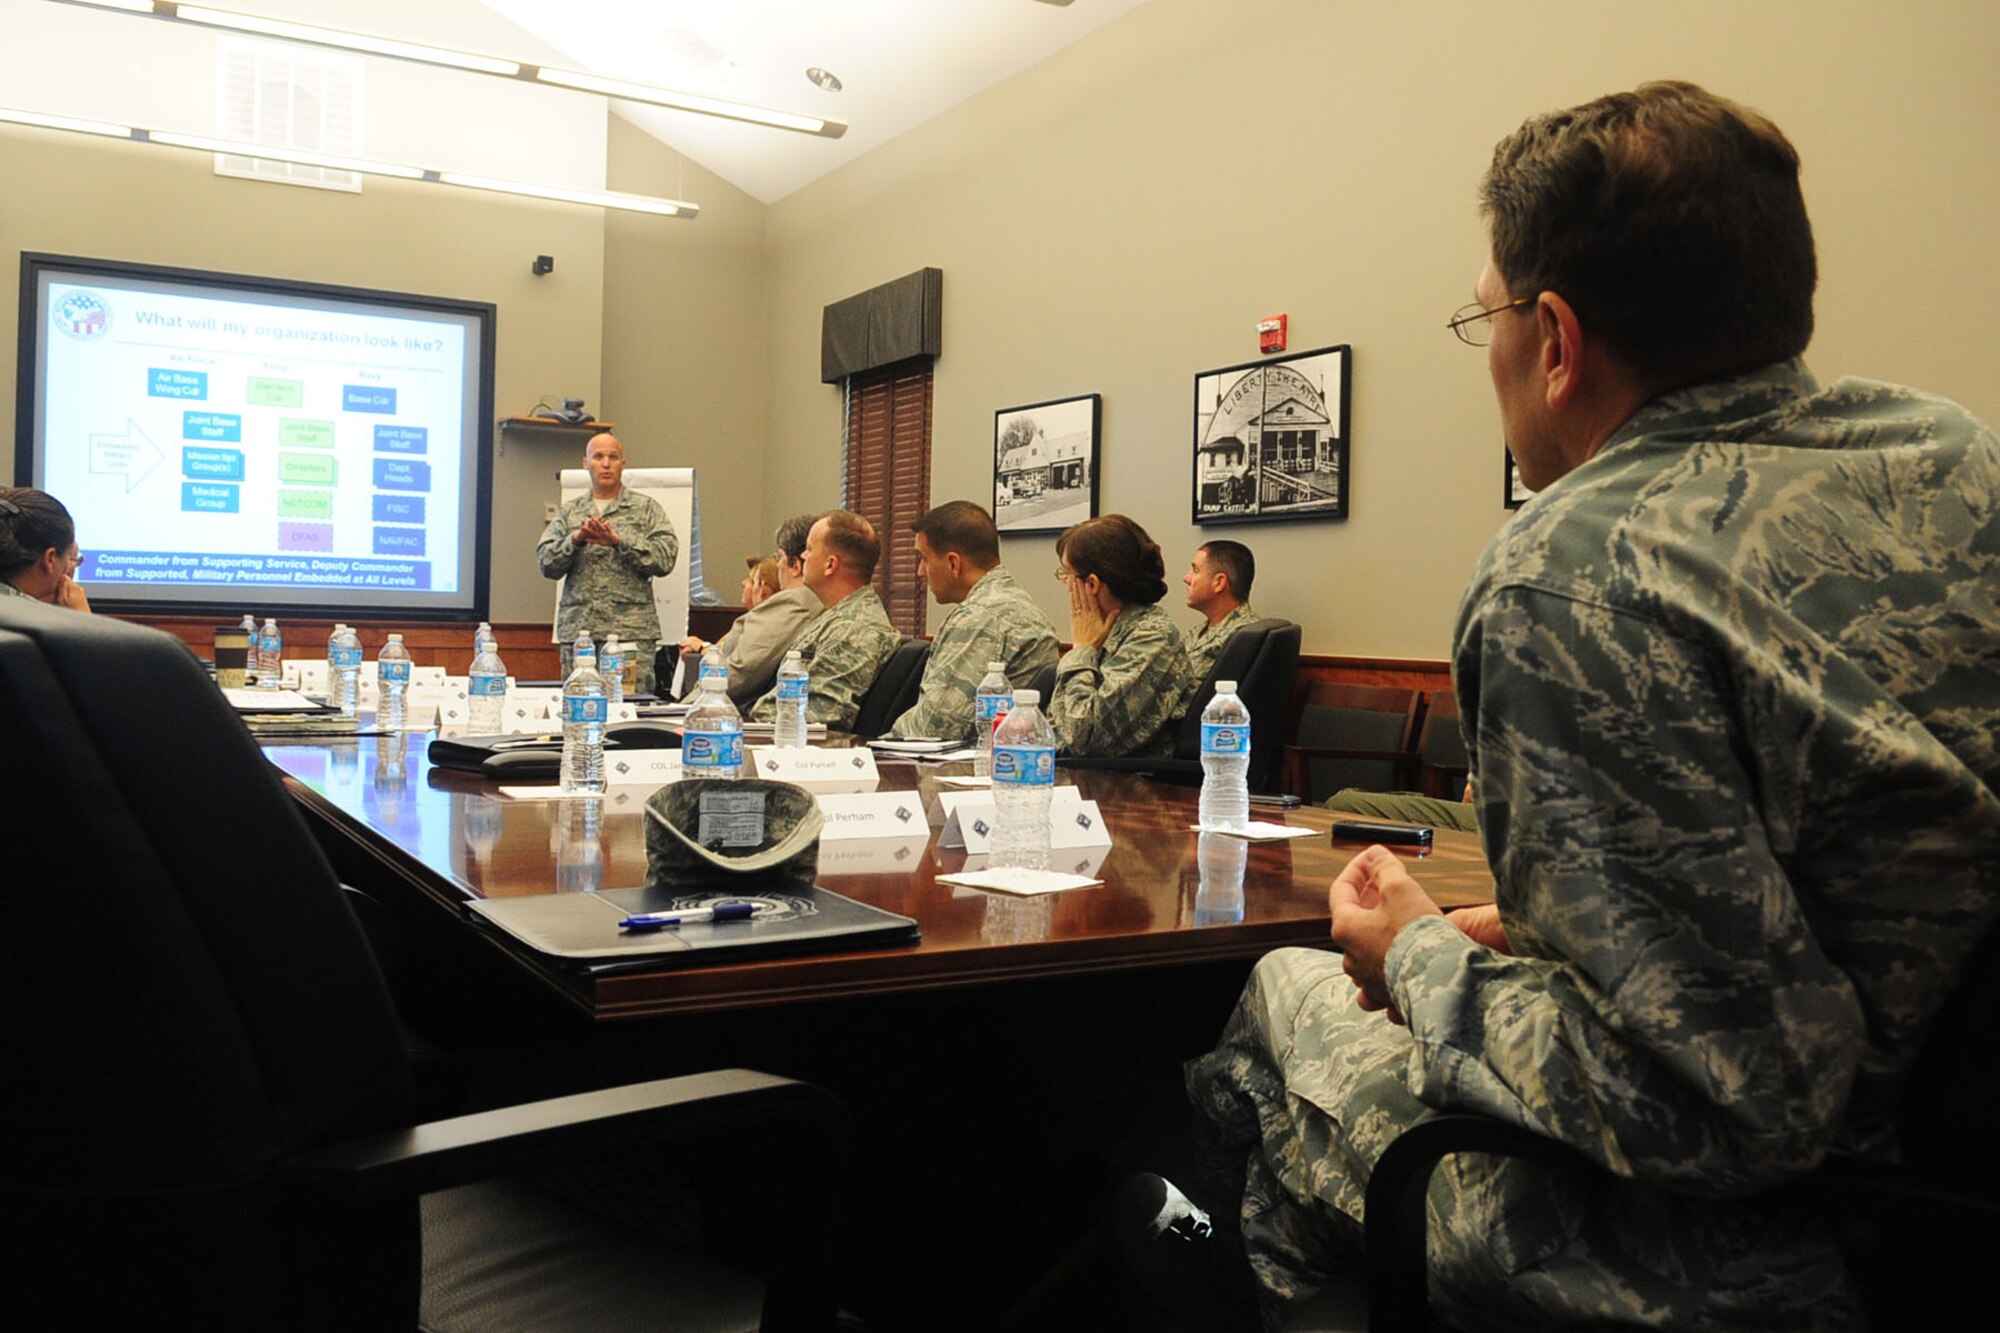 U.S Air Force Col. Charlie Perham, Office of the Secretary of Defense deputy director, basing, briefs Col. Korvin Auch, 633rd Air Base Wing commander, and Joint Base Langley-Eustis senior leaders about the future prospects of joint basing during his visit to Langley Air Force Base, Va., Sept. 20, 2012. Representatives from OSD toured JBLE to receive feedback and inform leadership from both installations about the future of joint basing. (U.S. Air Force photo by Staff Sgt. Ashley Hawkins/Released)